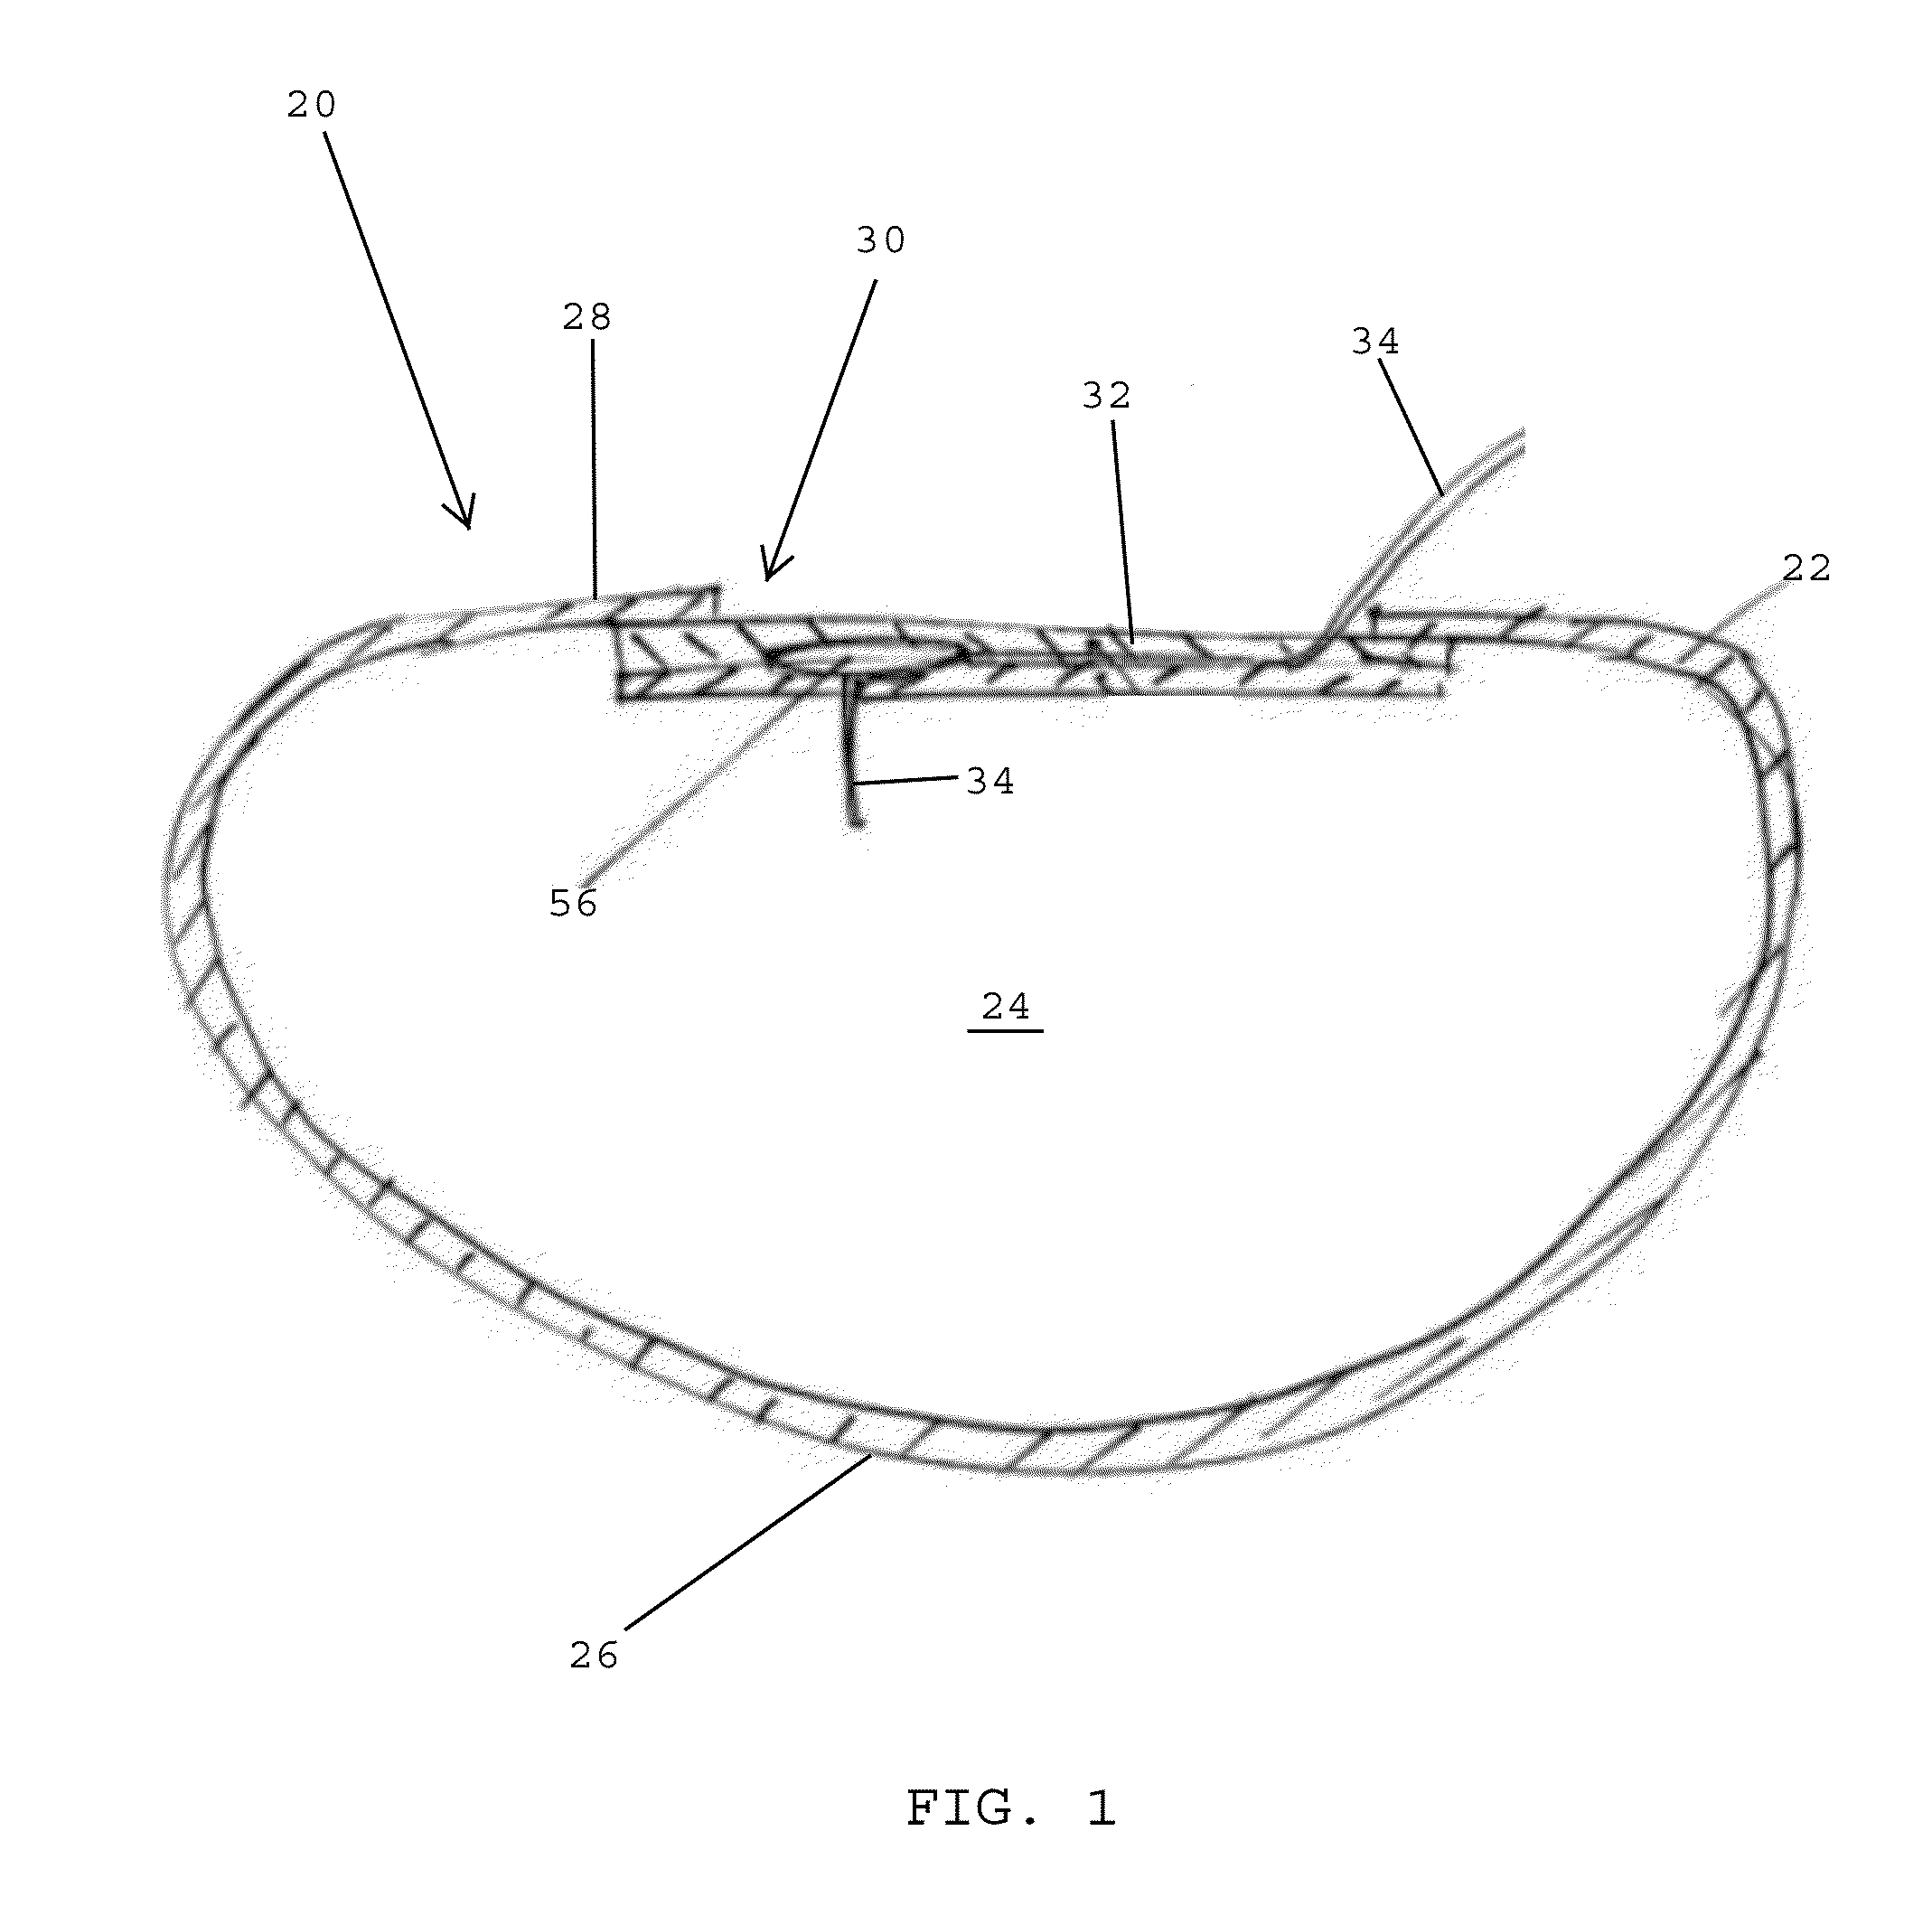 Valve assemblies for implantable prostheses and tissue expanders